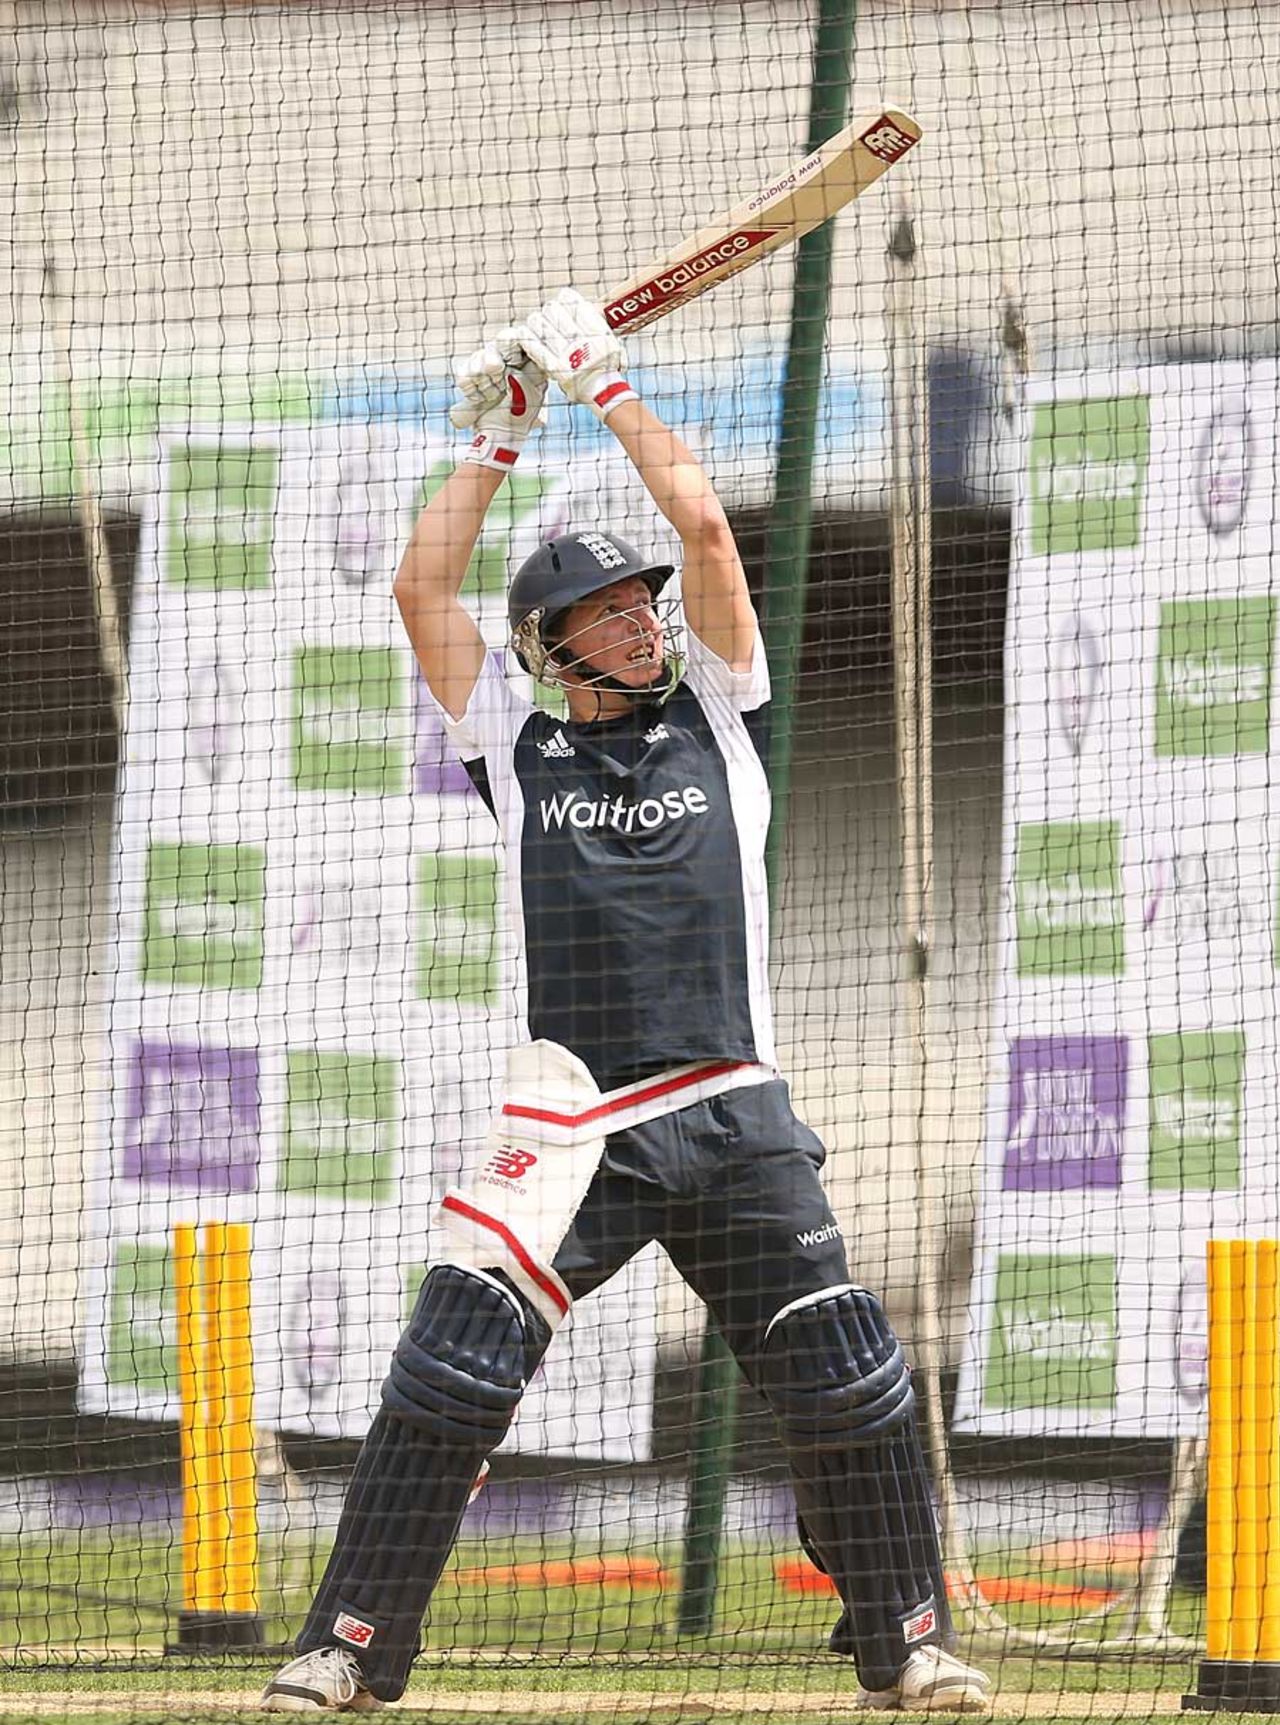 Gary Ballance is an option for England's middle order, The Oval, May 21, 2014